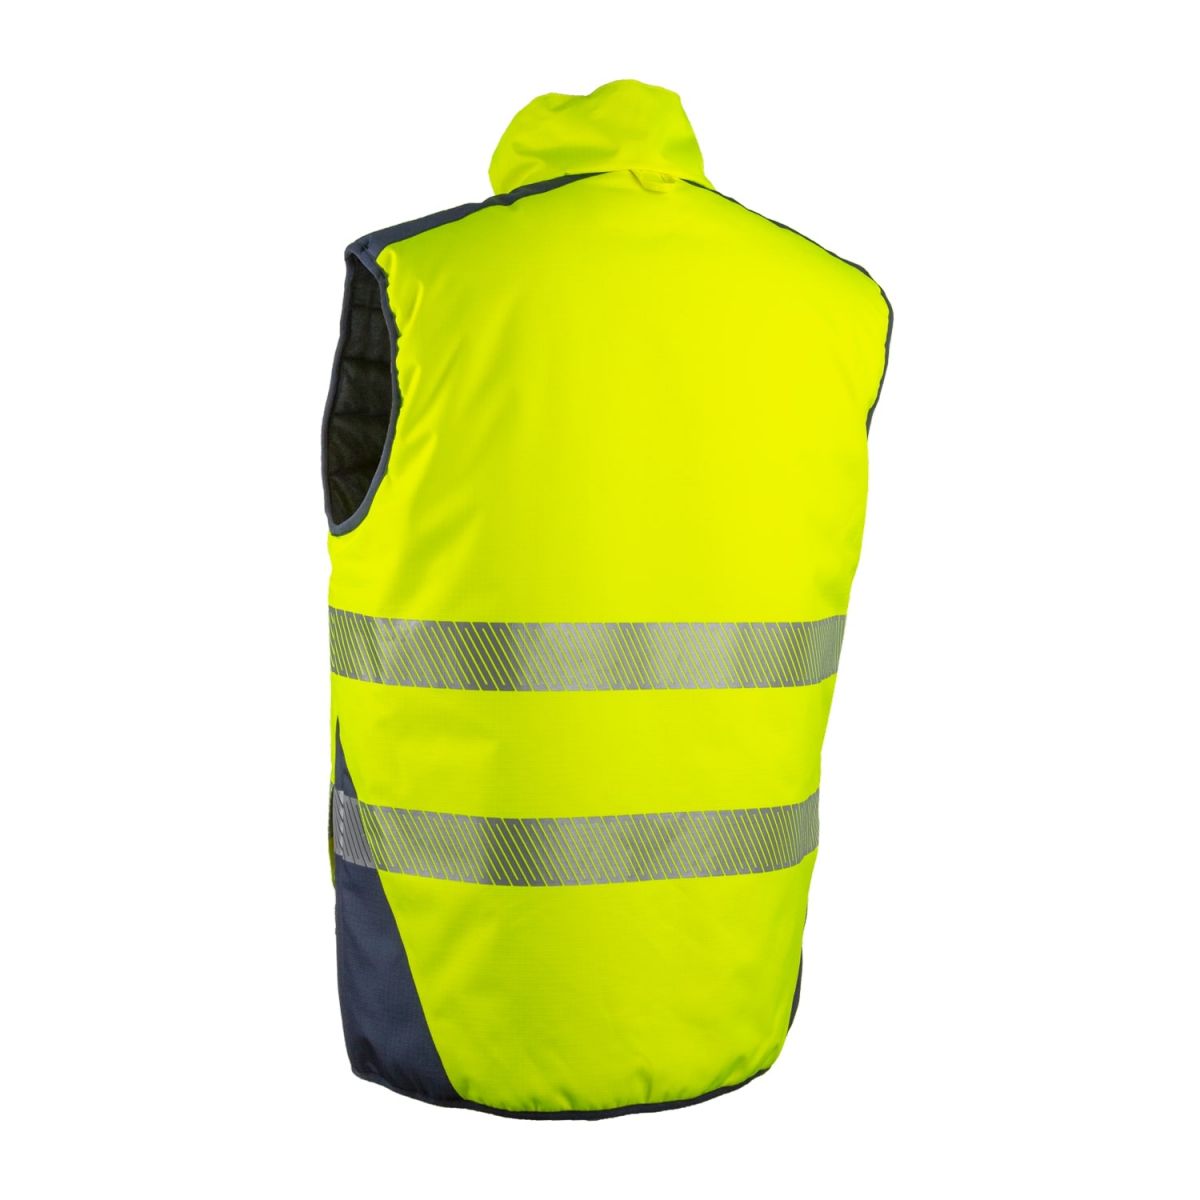 Gilet YORU froid réversible jaune HV/marine, Ripstop 100%PES maille - COVERGUARD - Taille L 1